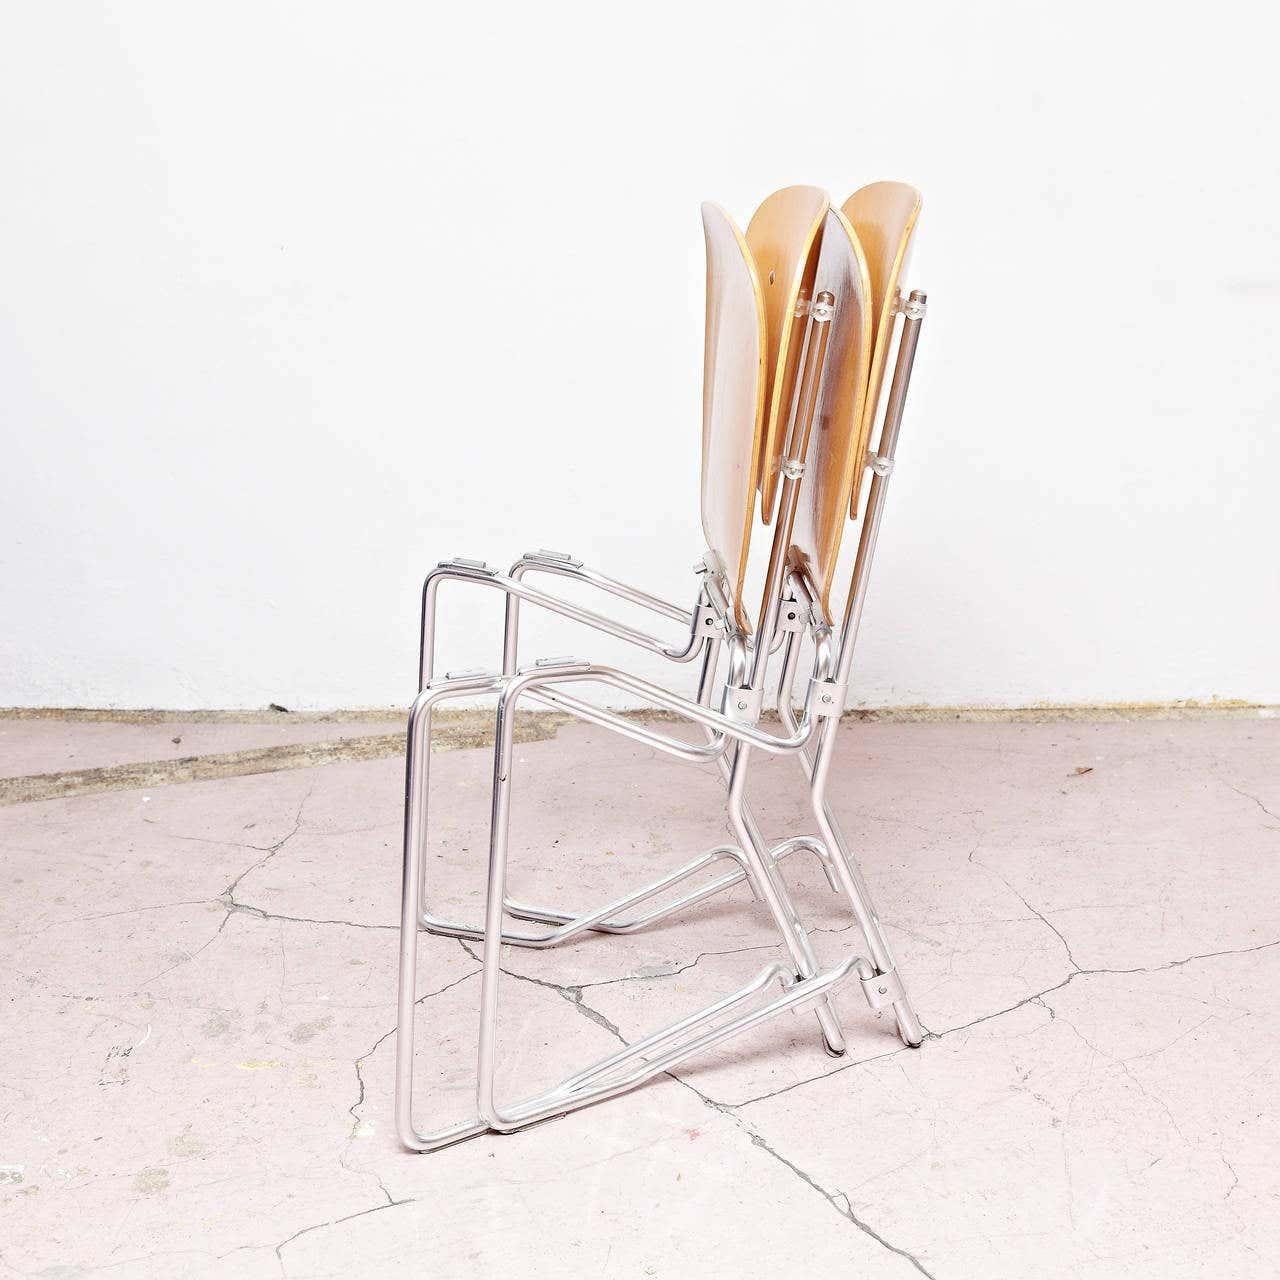 Stackable Aluflex chairs designed by Armin Wirth.
Manufactured by Aluflex, Switzerland, circa 1950.

Metal and plywood.

In good original condition, with minor wear consistent with age and use, preserving a beautiful patina.

4 chairs